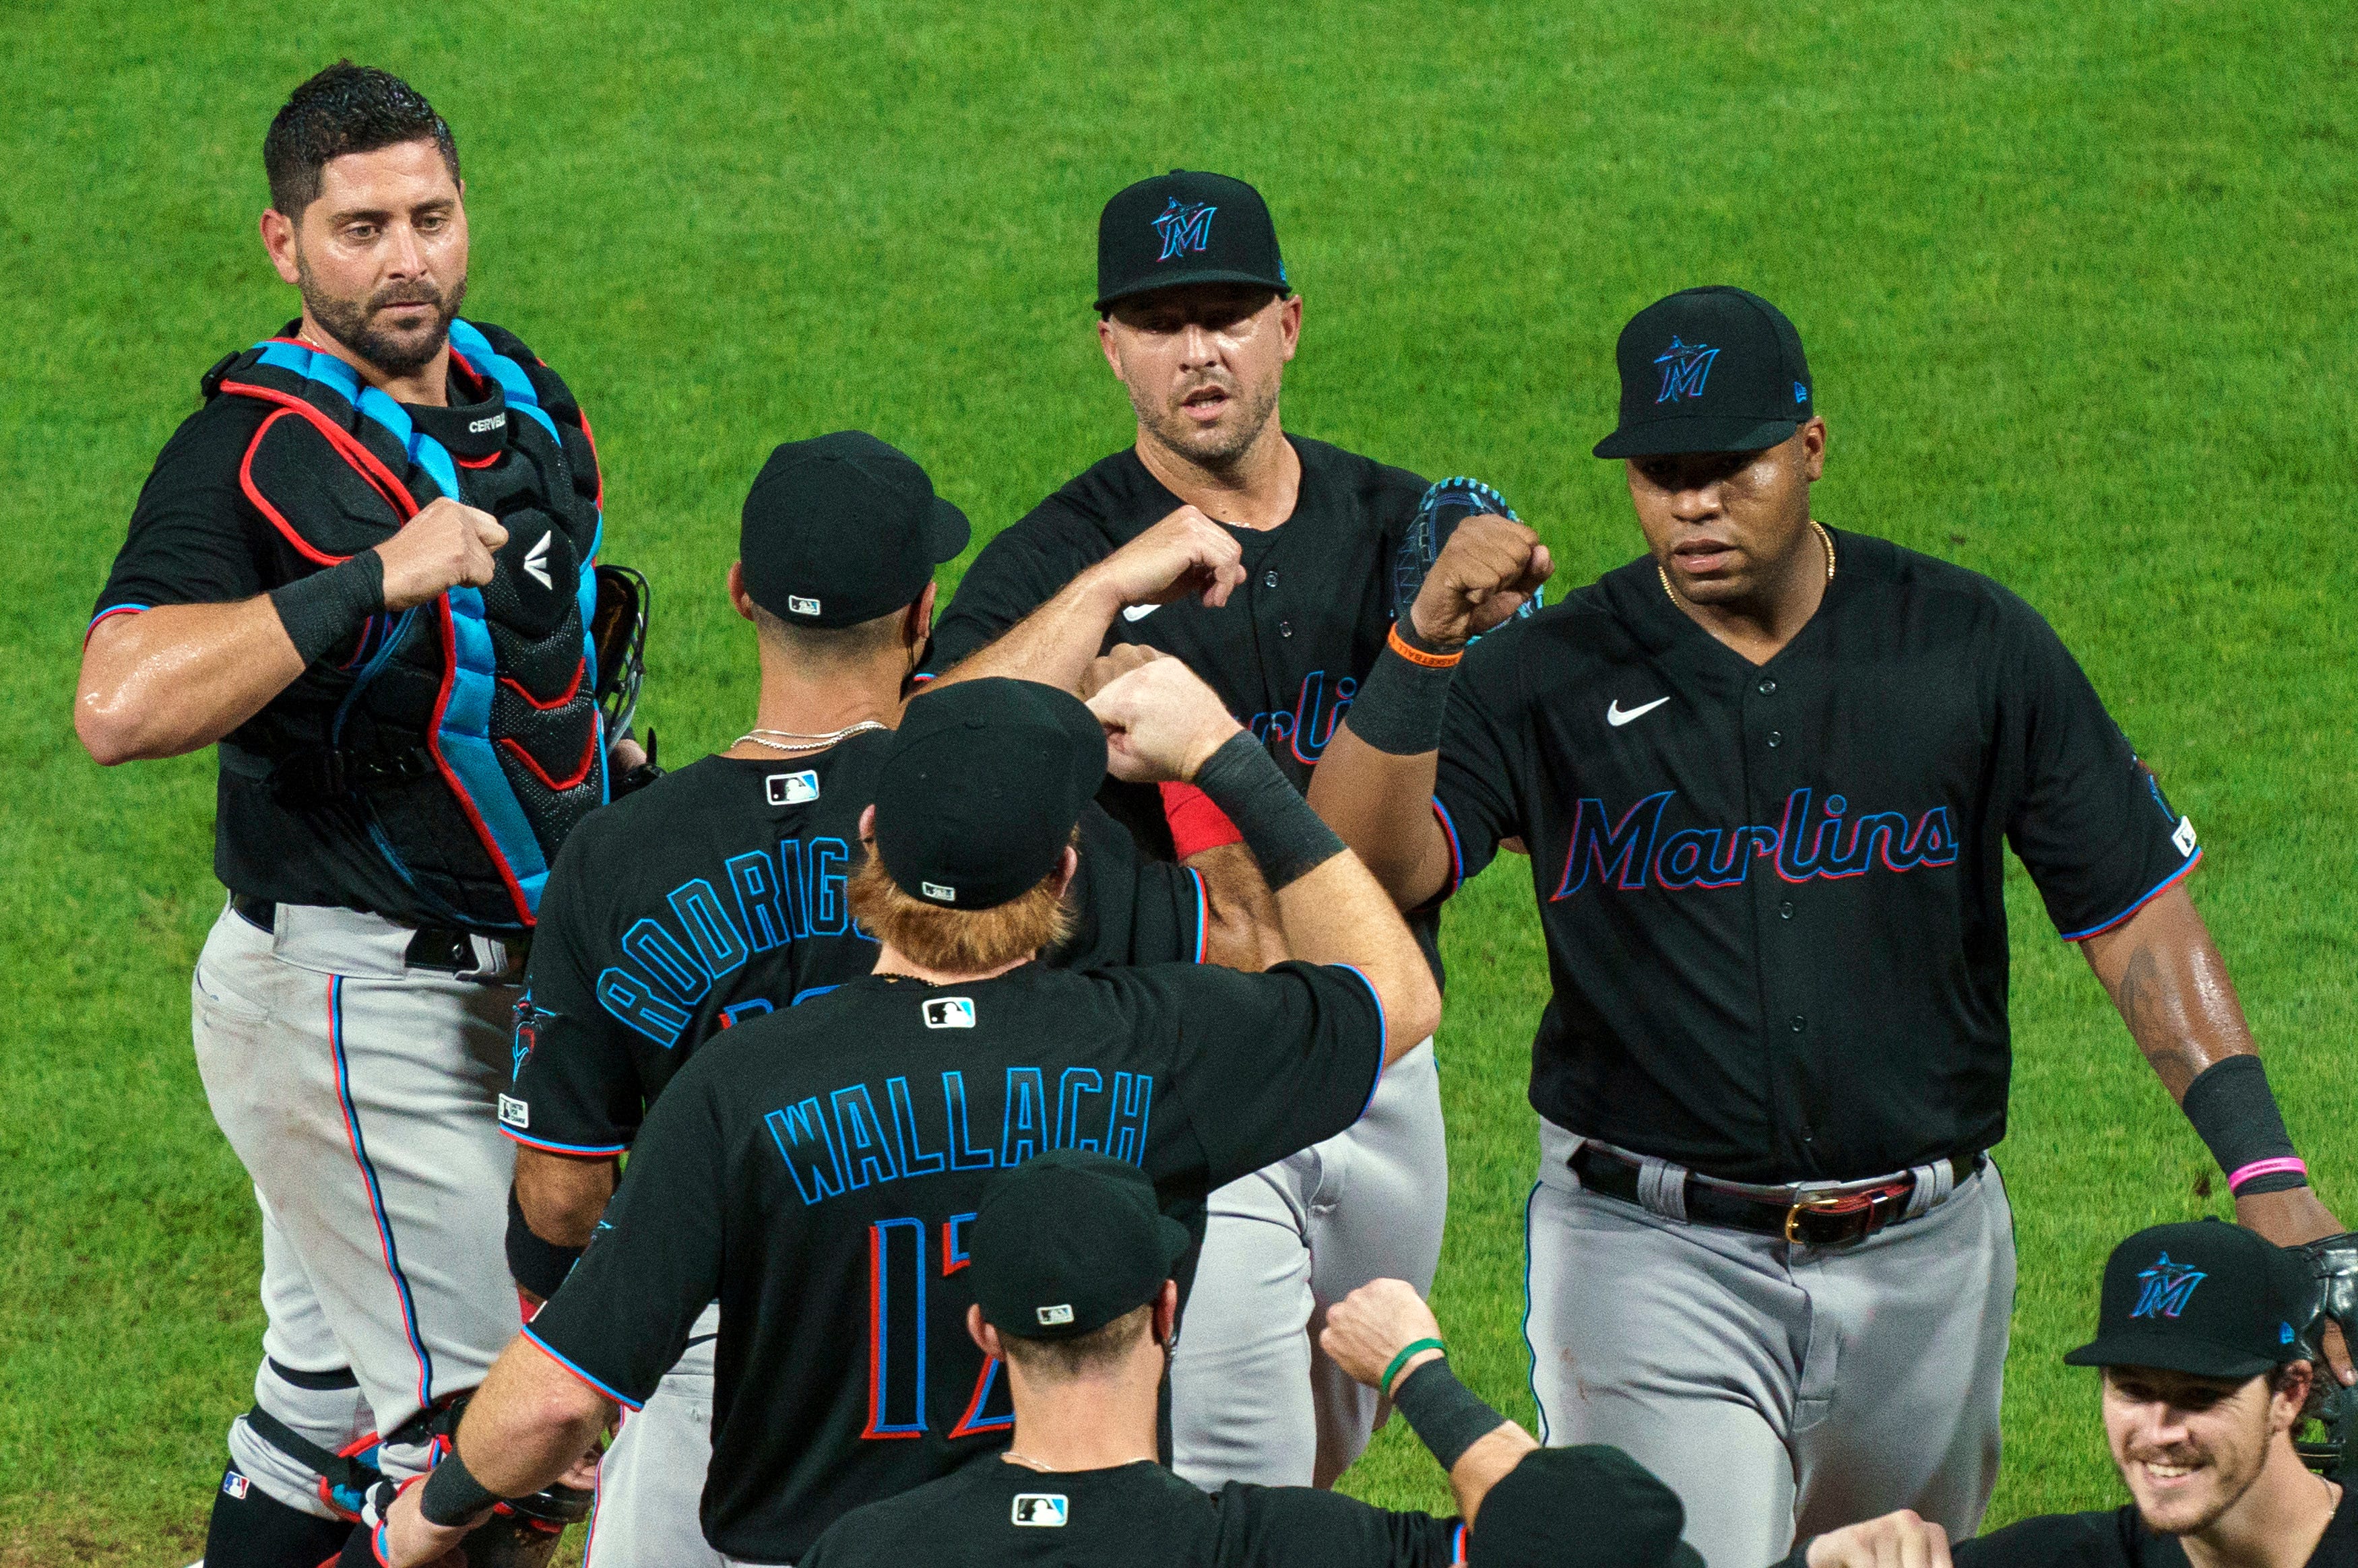 Will the Marlins keep their playoff win streak alive in the 2020 NL Wild Card round?